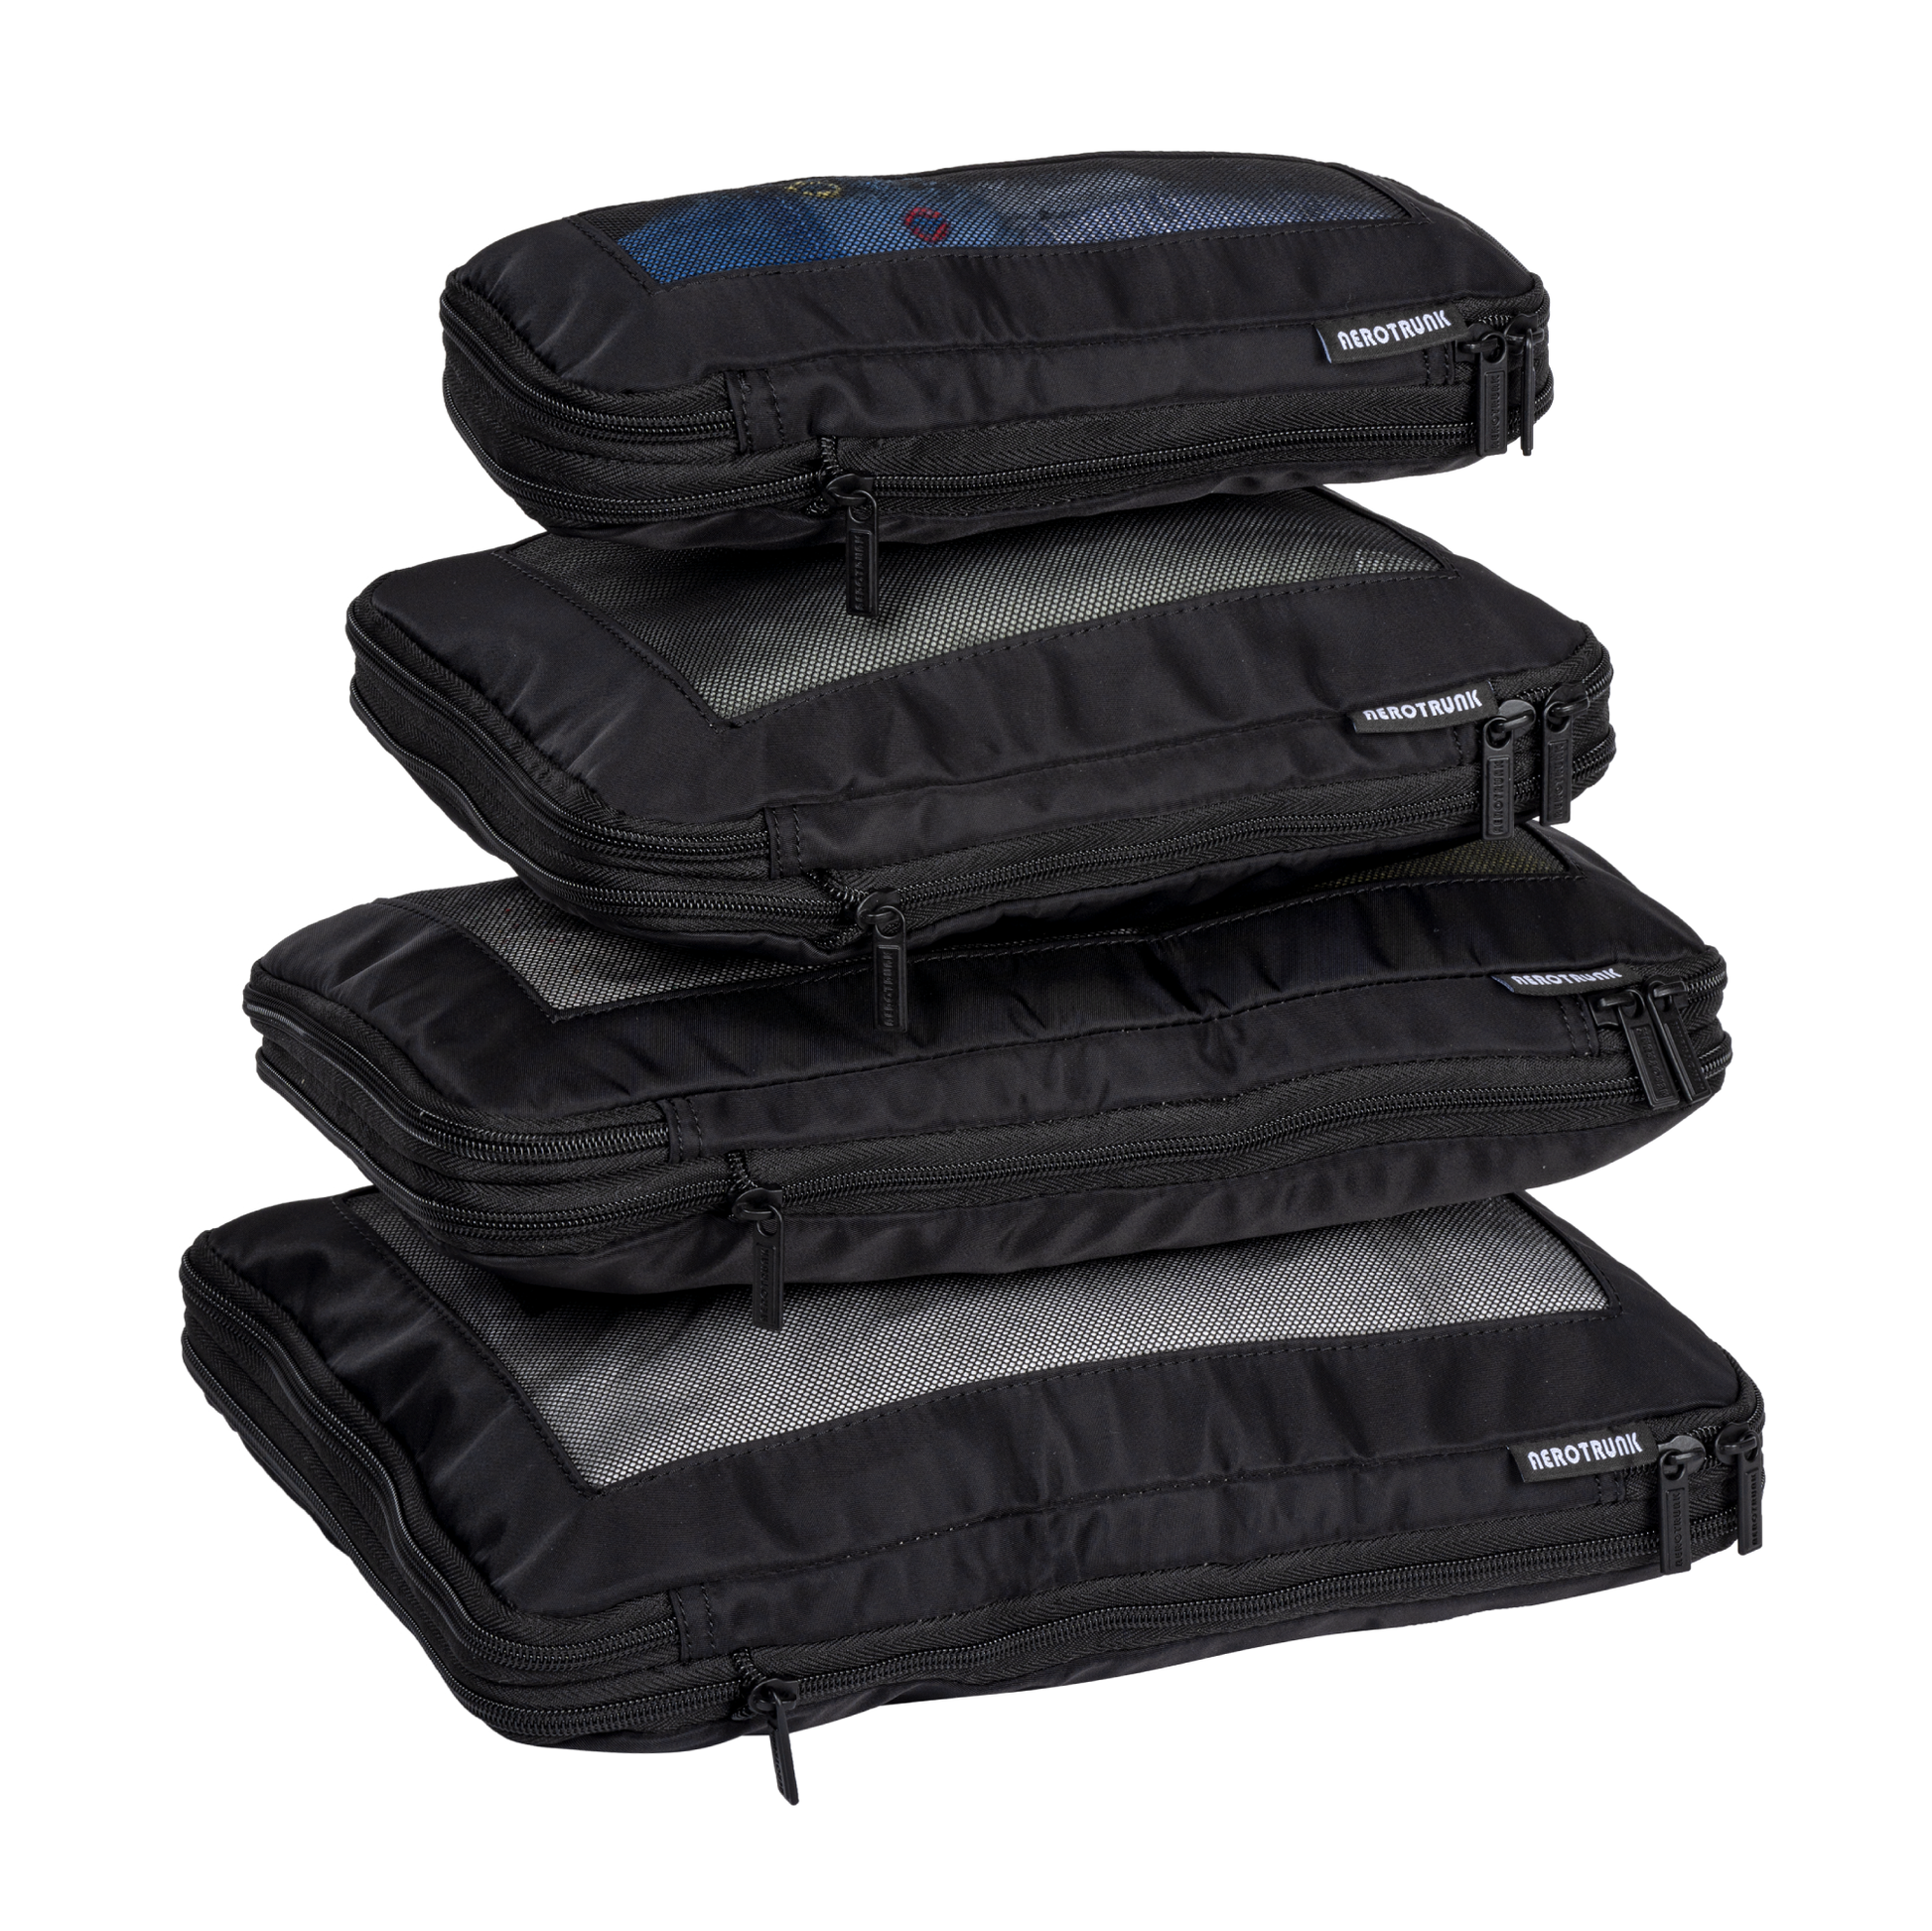 Aerotrunk Collapsible Compression Packing Cubes (4-pack) – aerotrunk